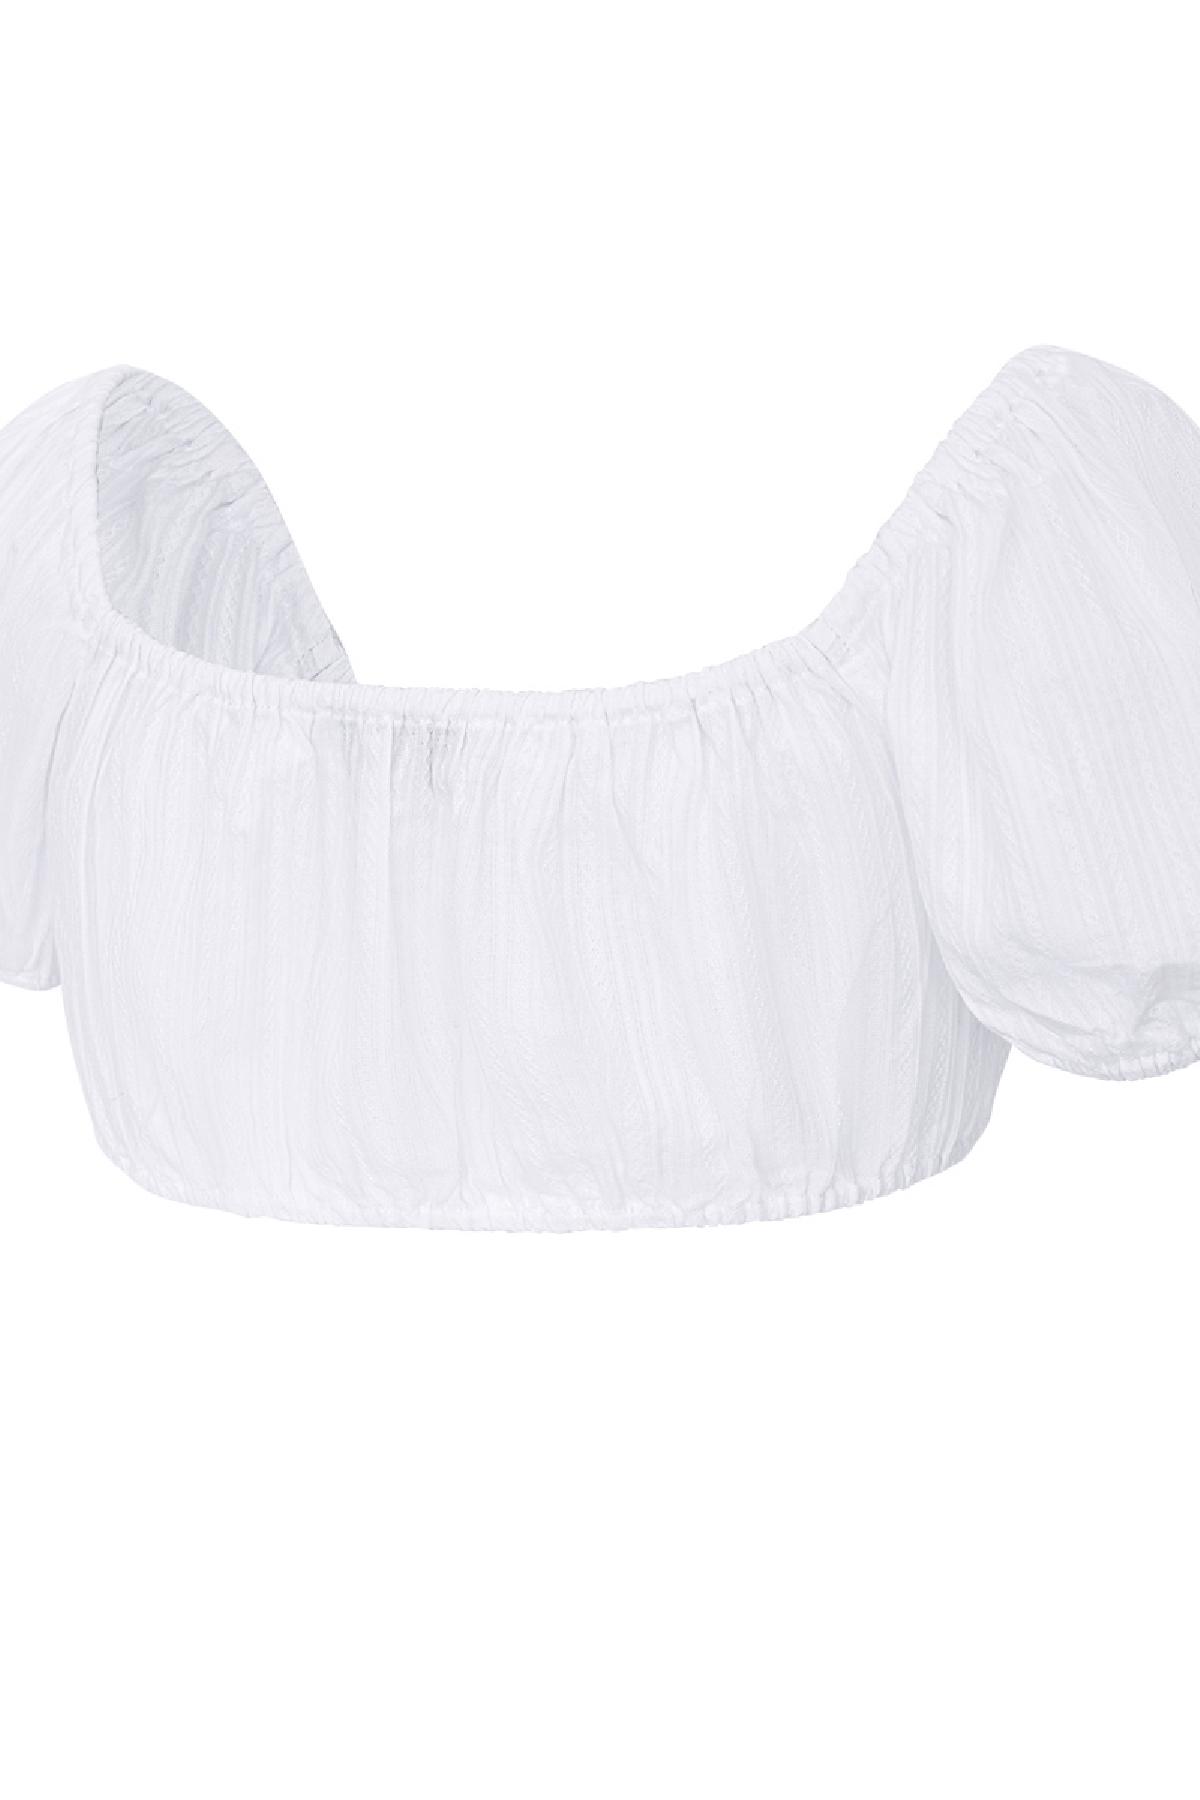 Crop top knotted White S Picture6